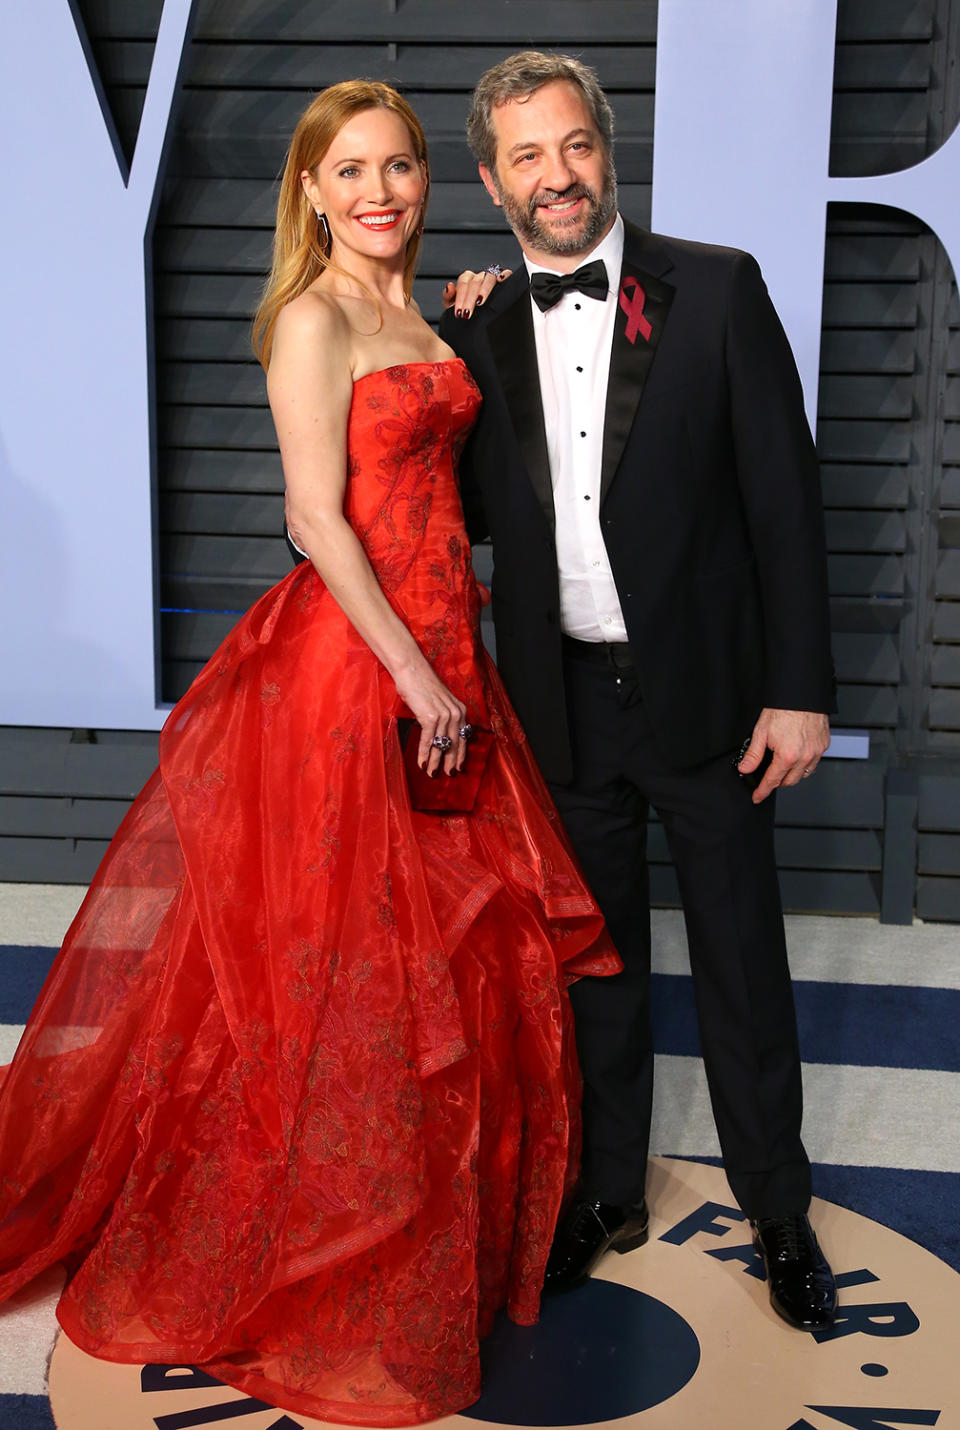 <p>The actress, pictured with her producer husband, was the belle of the ball in her red Zac Posen gown. (Photo: JEAN-BAPTISTE LACROIX/AFP/Getty Images) </p>